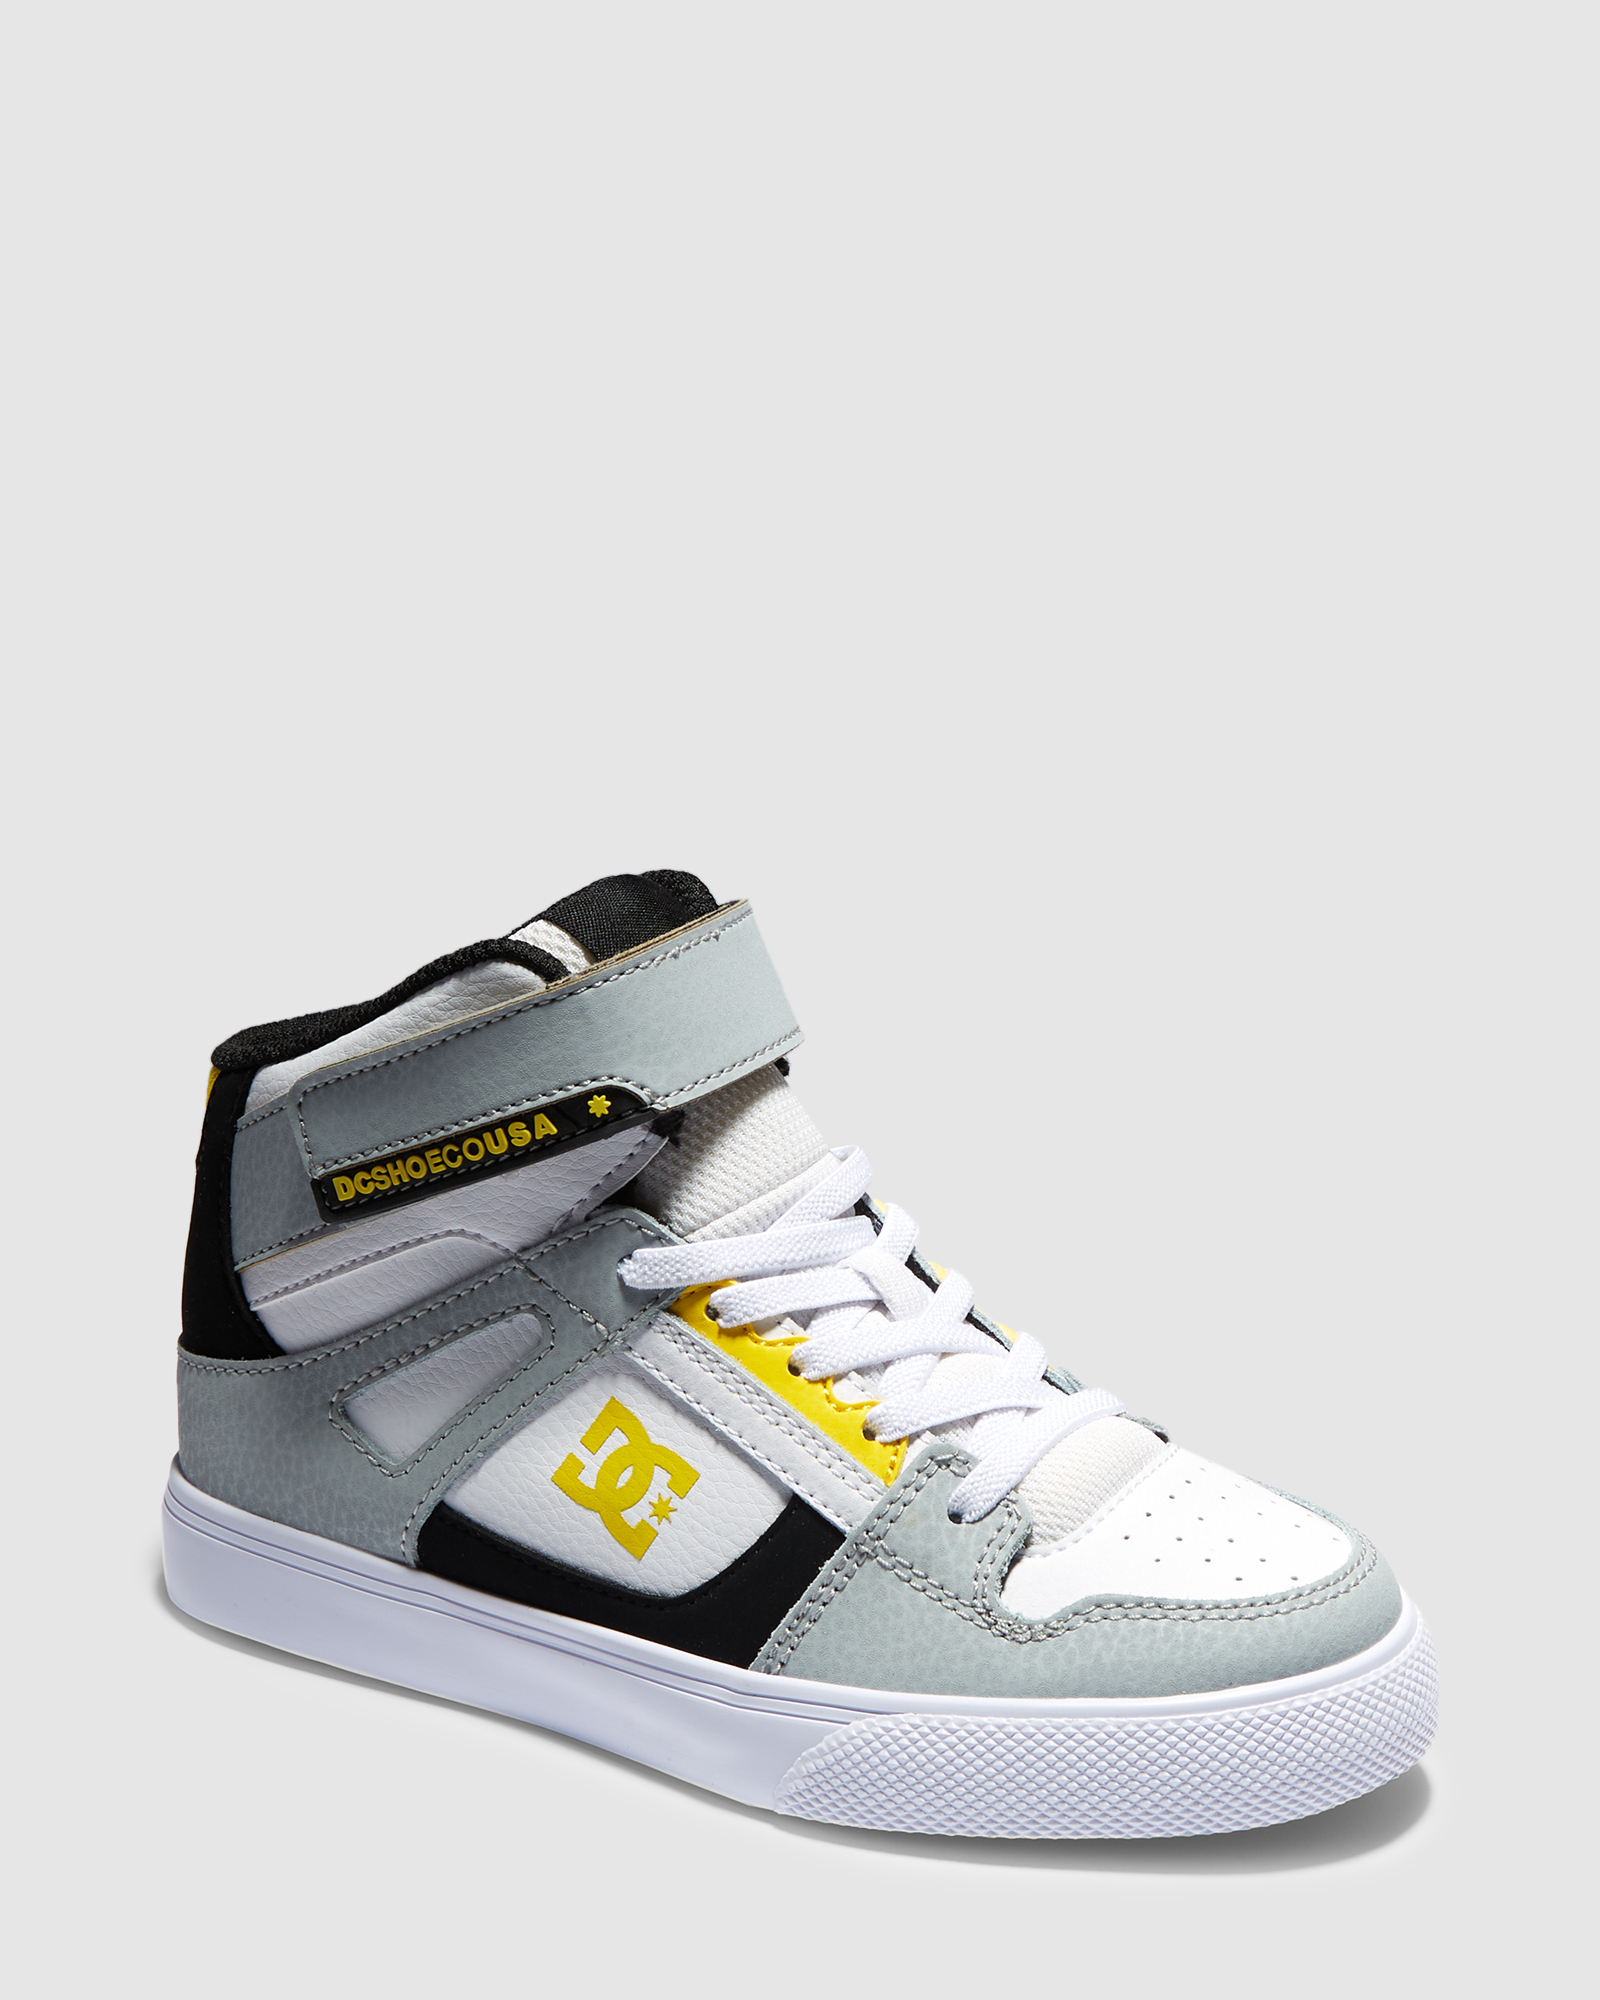 Dc Shoes Kids' Pure High Elastic Lace High-Top Shoes - White Grey Yellow |  SurfStitch